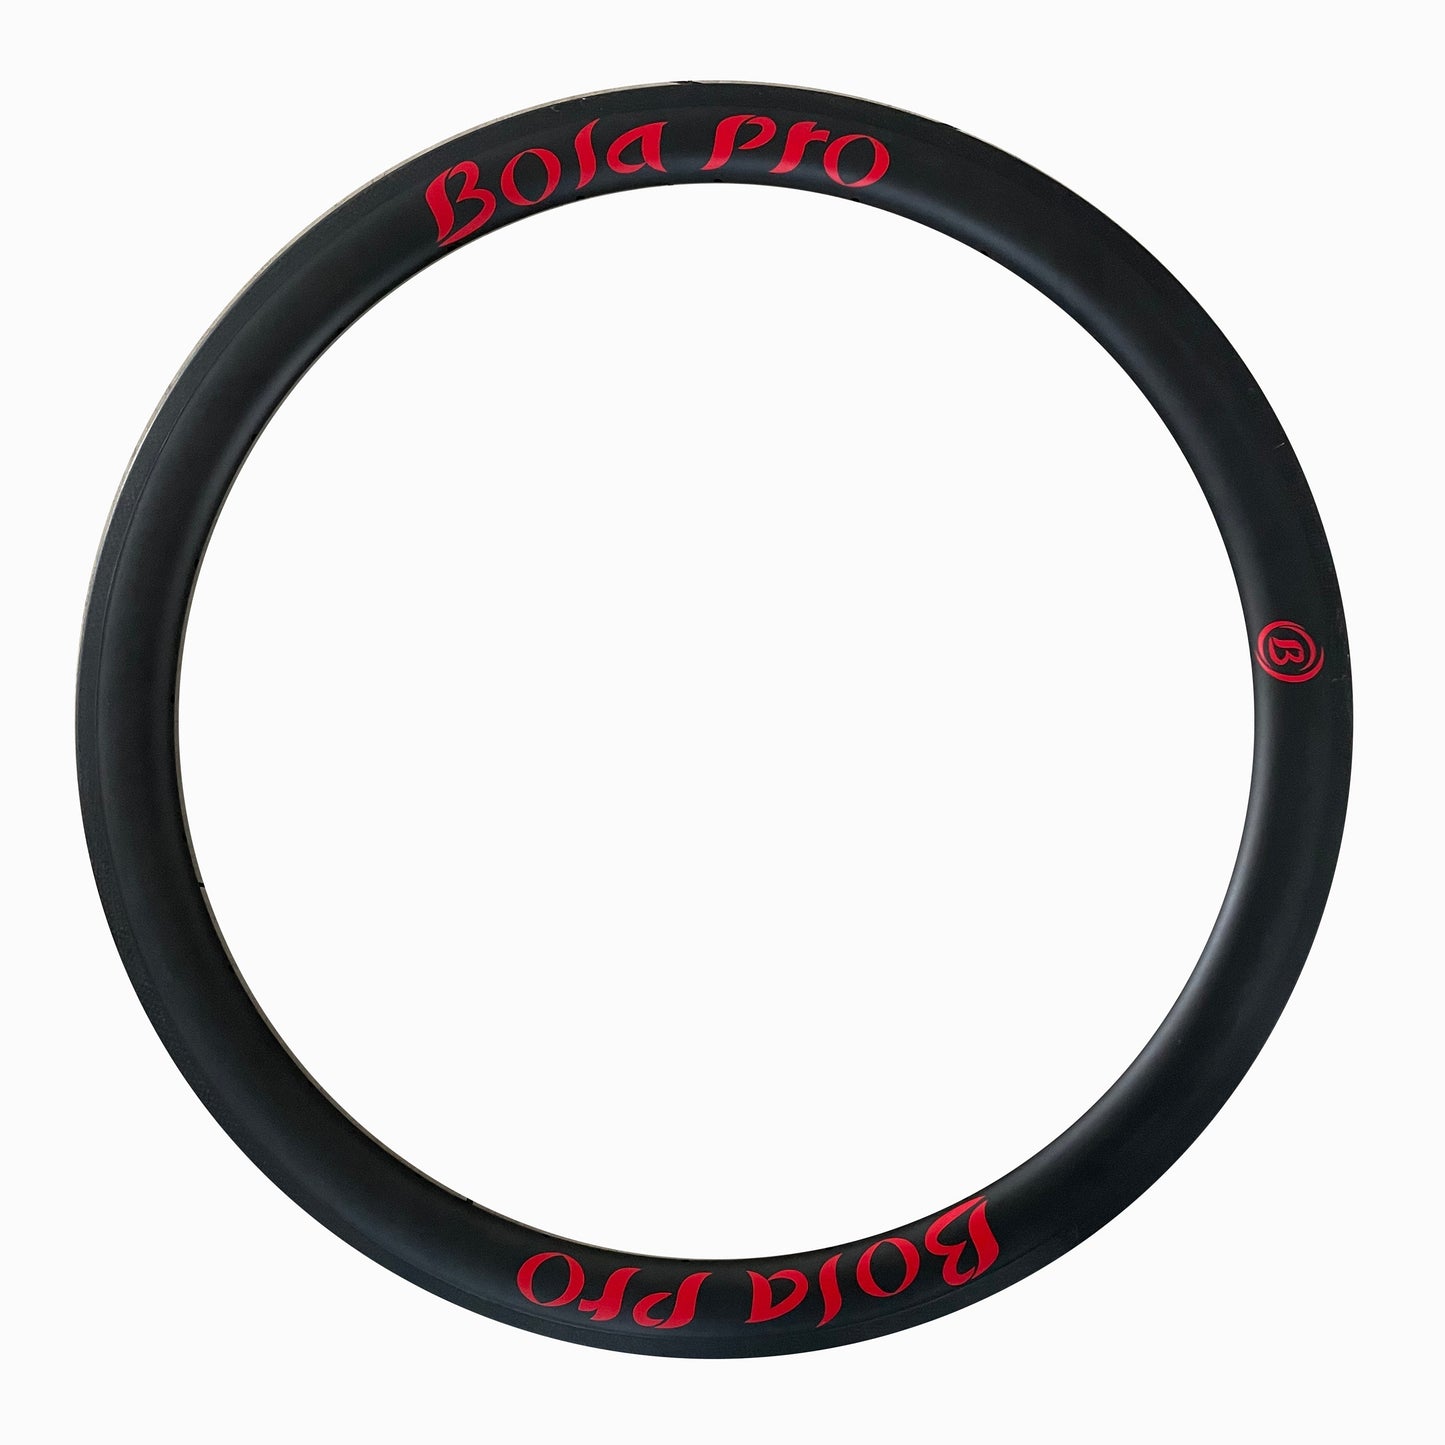 Tubeless  carbon rims 38mm profile  25mm wide for Disc Brake